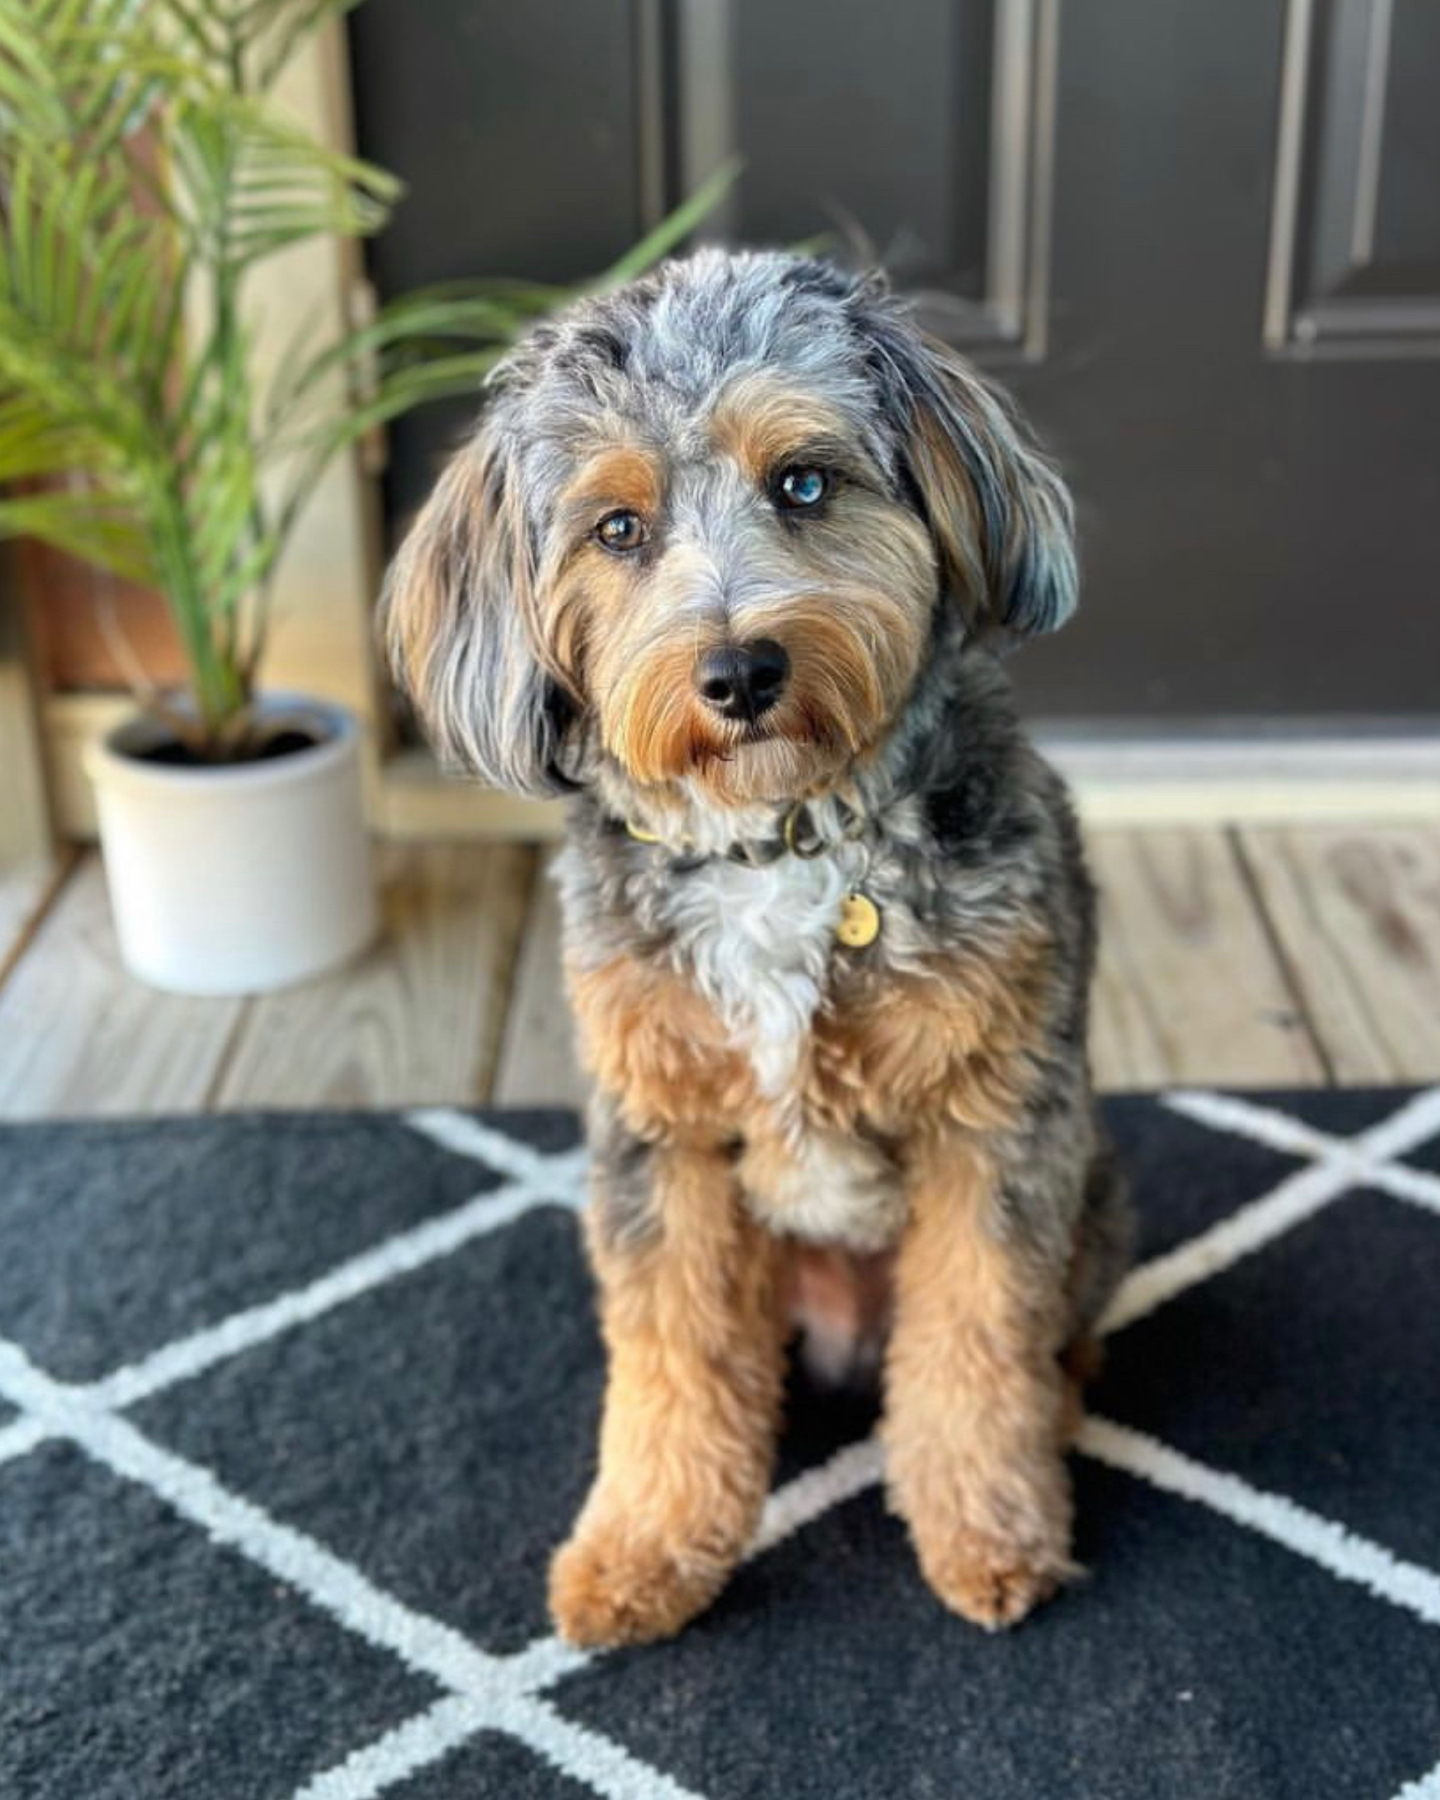 Mini Aussiedoodle dog with one brown and one blue eye